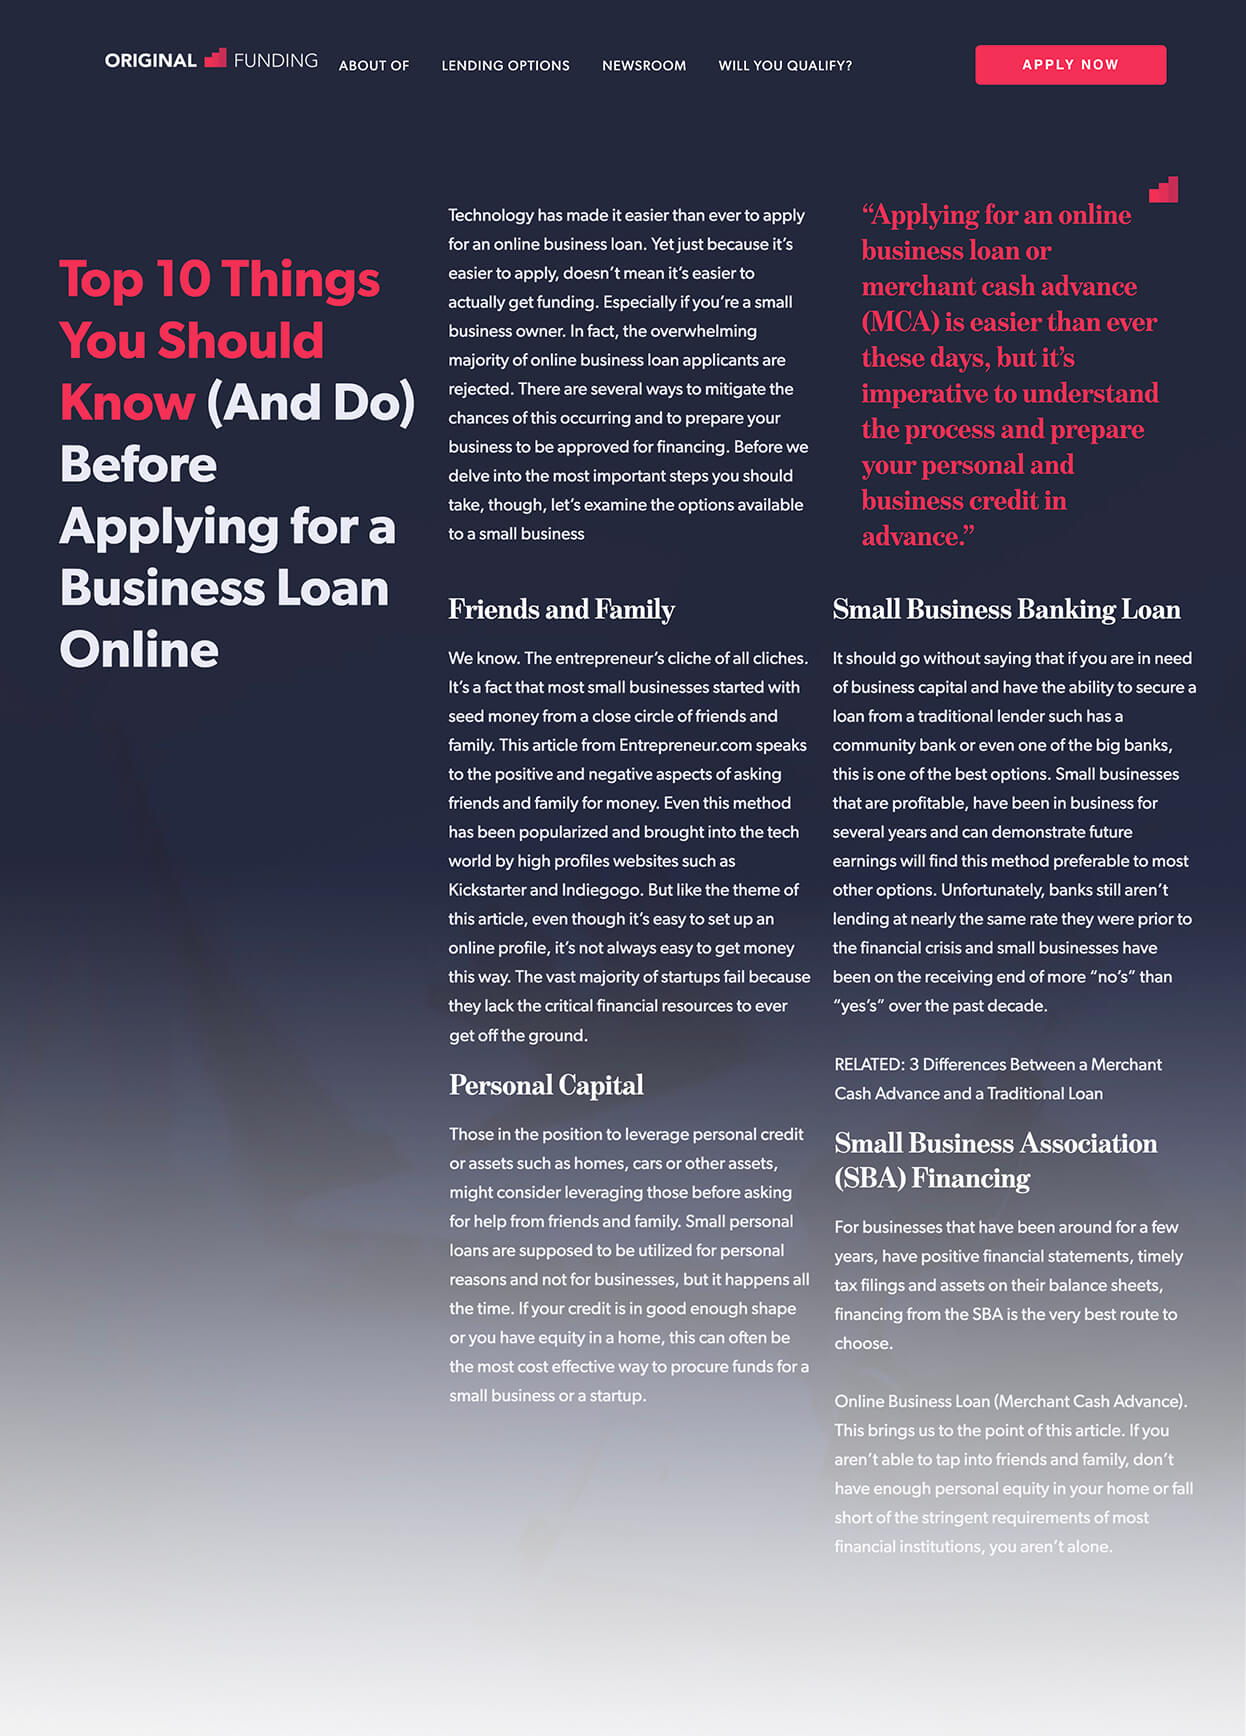 Screenshot of Original Funding Top 10 Things You Should Know (And Do) Before Applying for a Business Loan Online Pillar